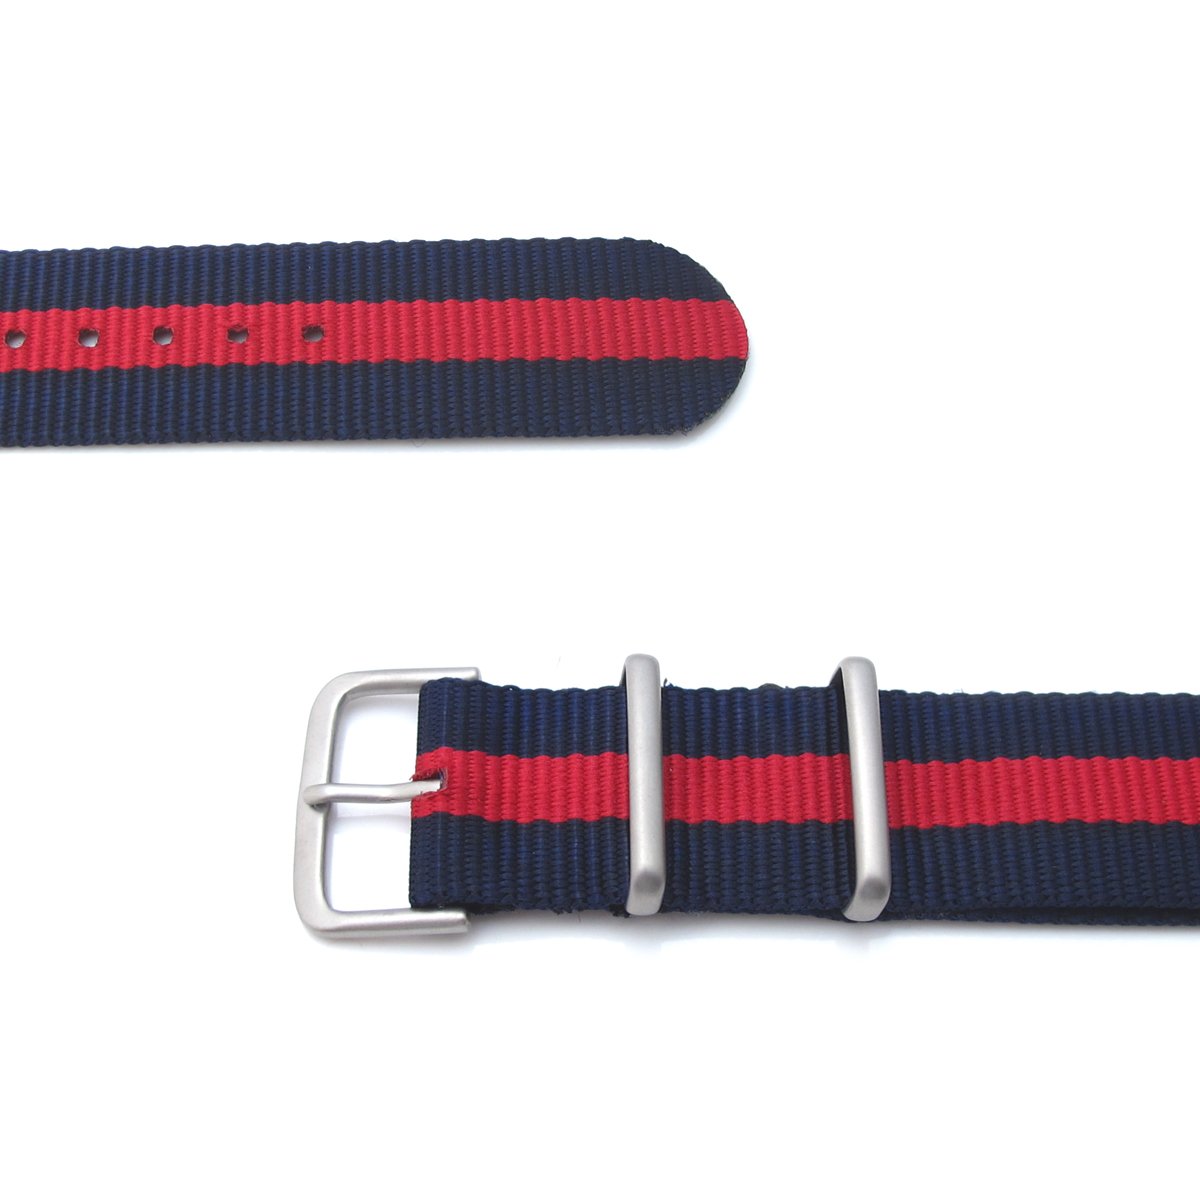 MiLTAT 20mm G10 military watch strap ballistic nylon armband Brushed Red & Blue Stripes Strapcode Watch Bands